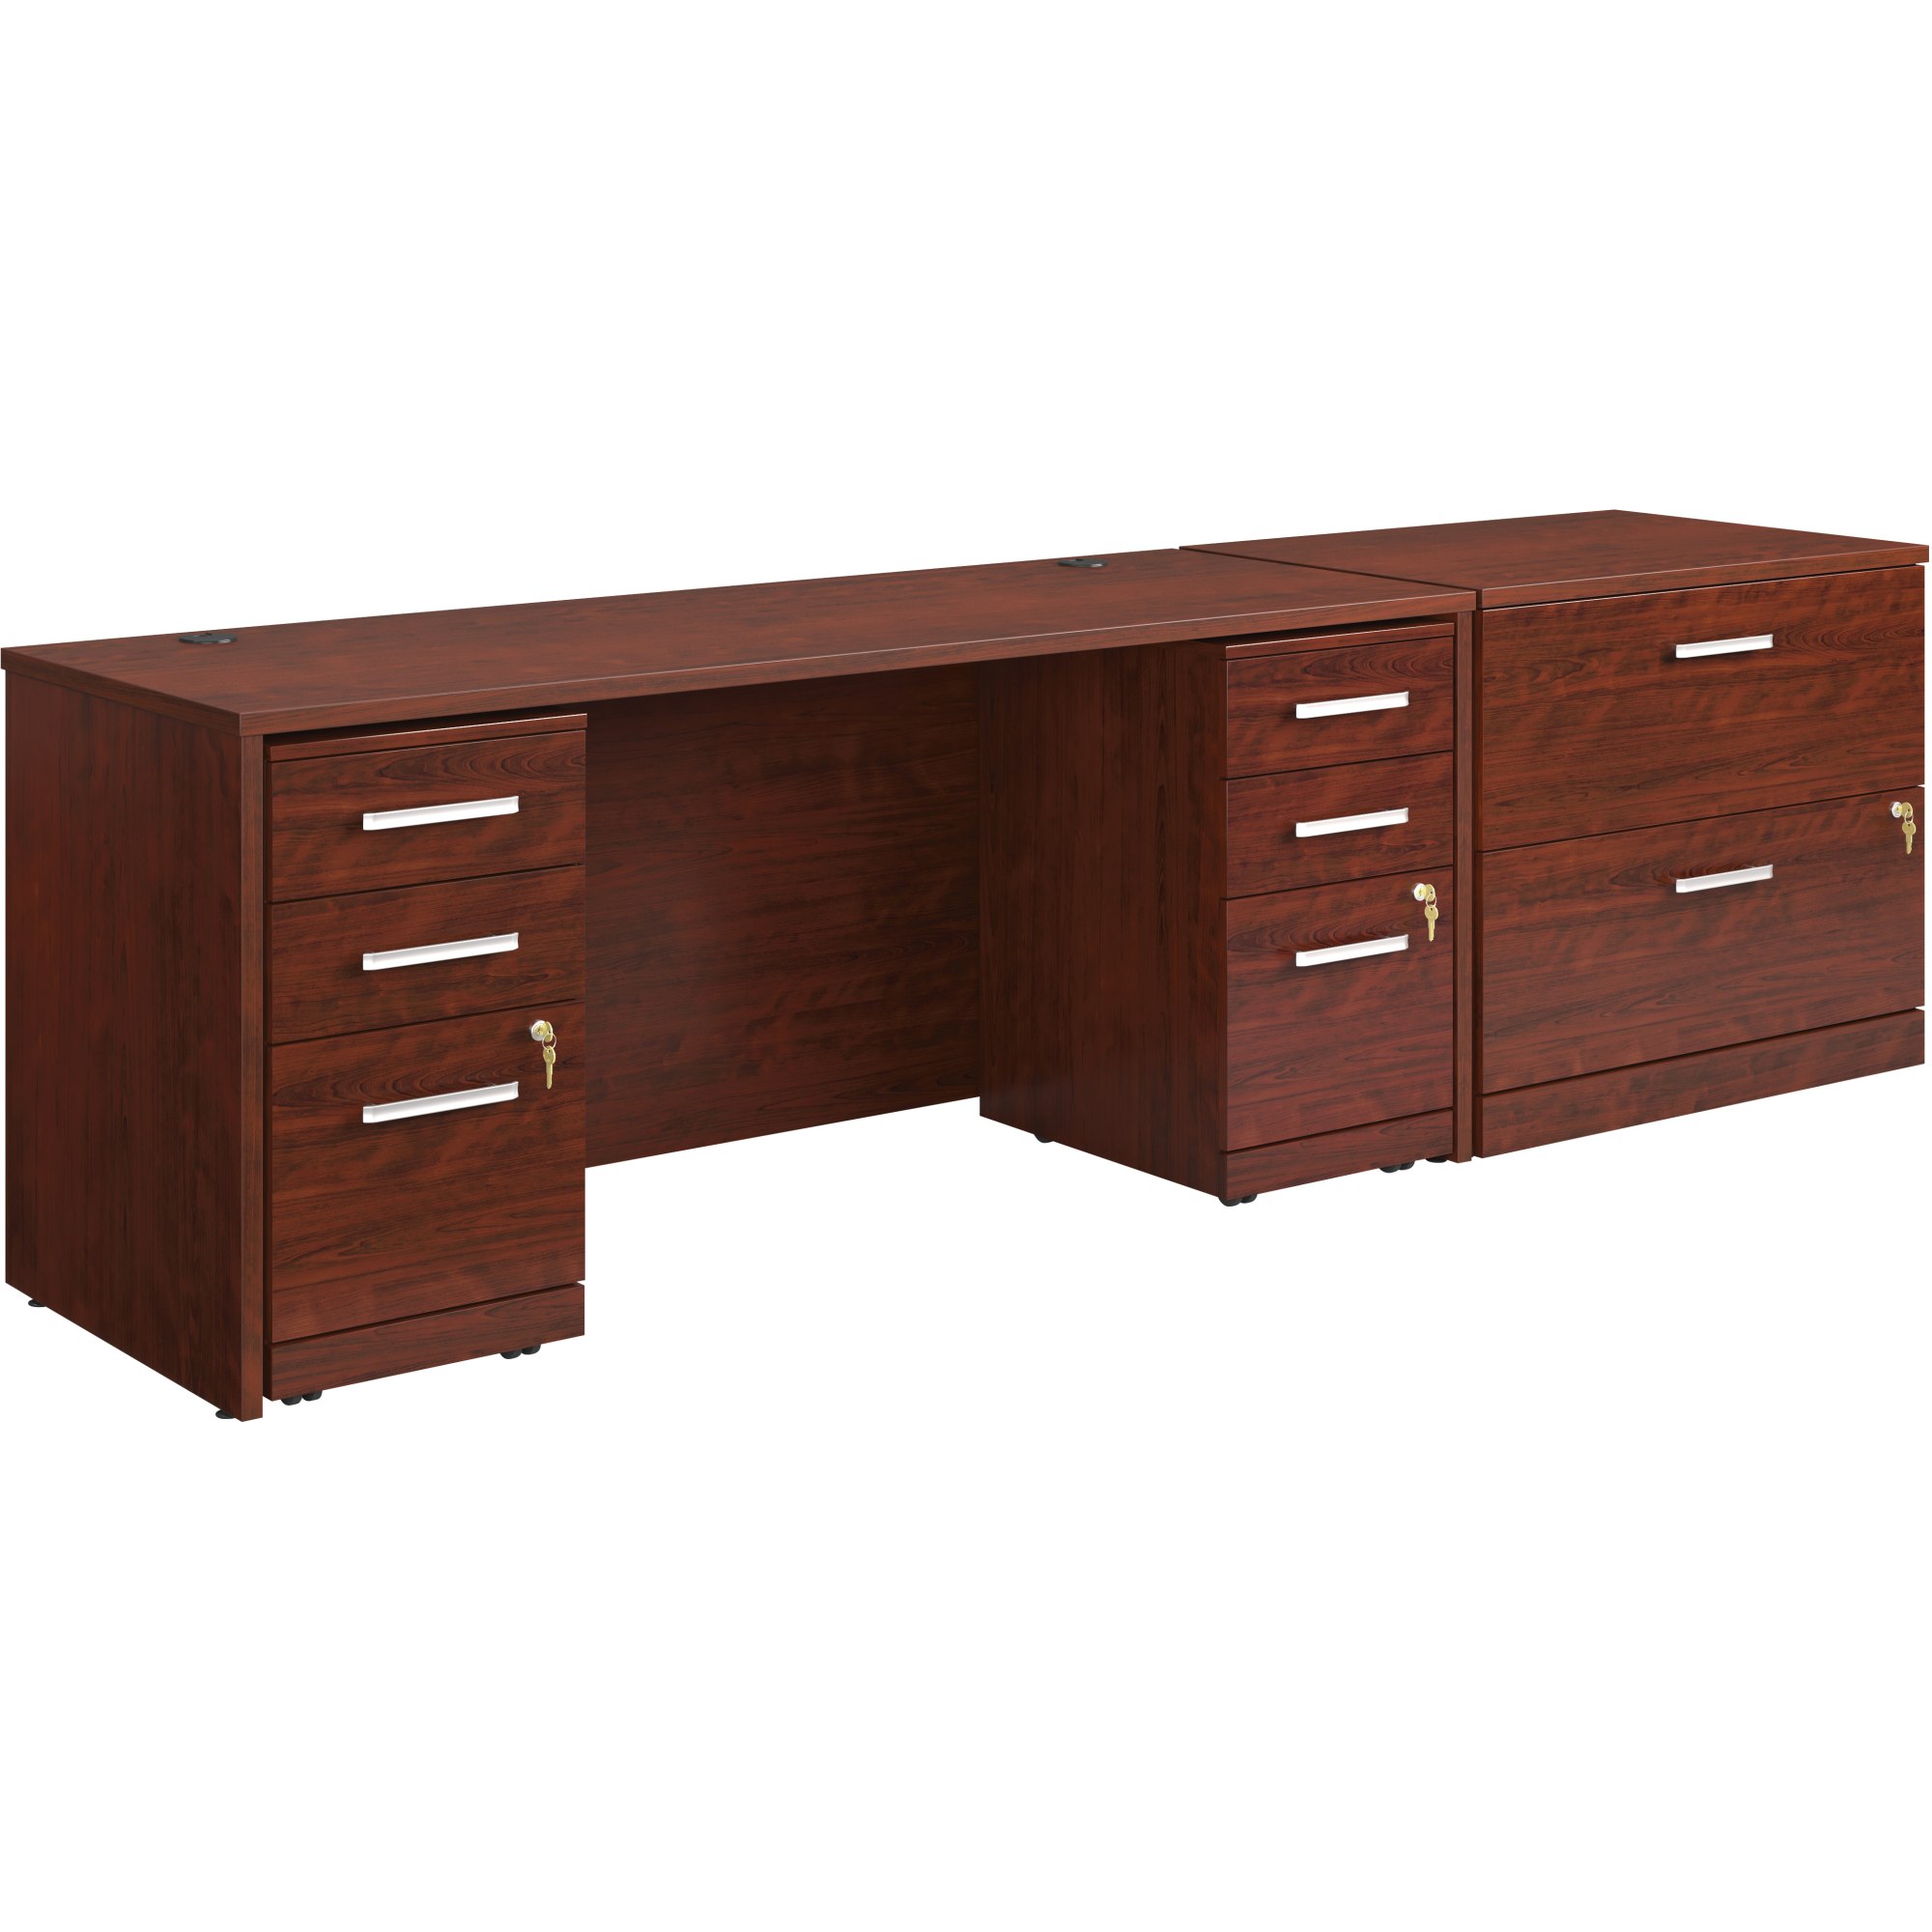 Sauder Affirm 72" x 24" Desk Shell/Lateral File/Two 3-Drawer Mobile Files Cherry - image 2 of 8